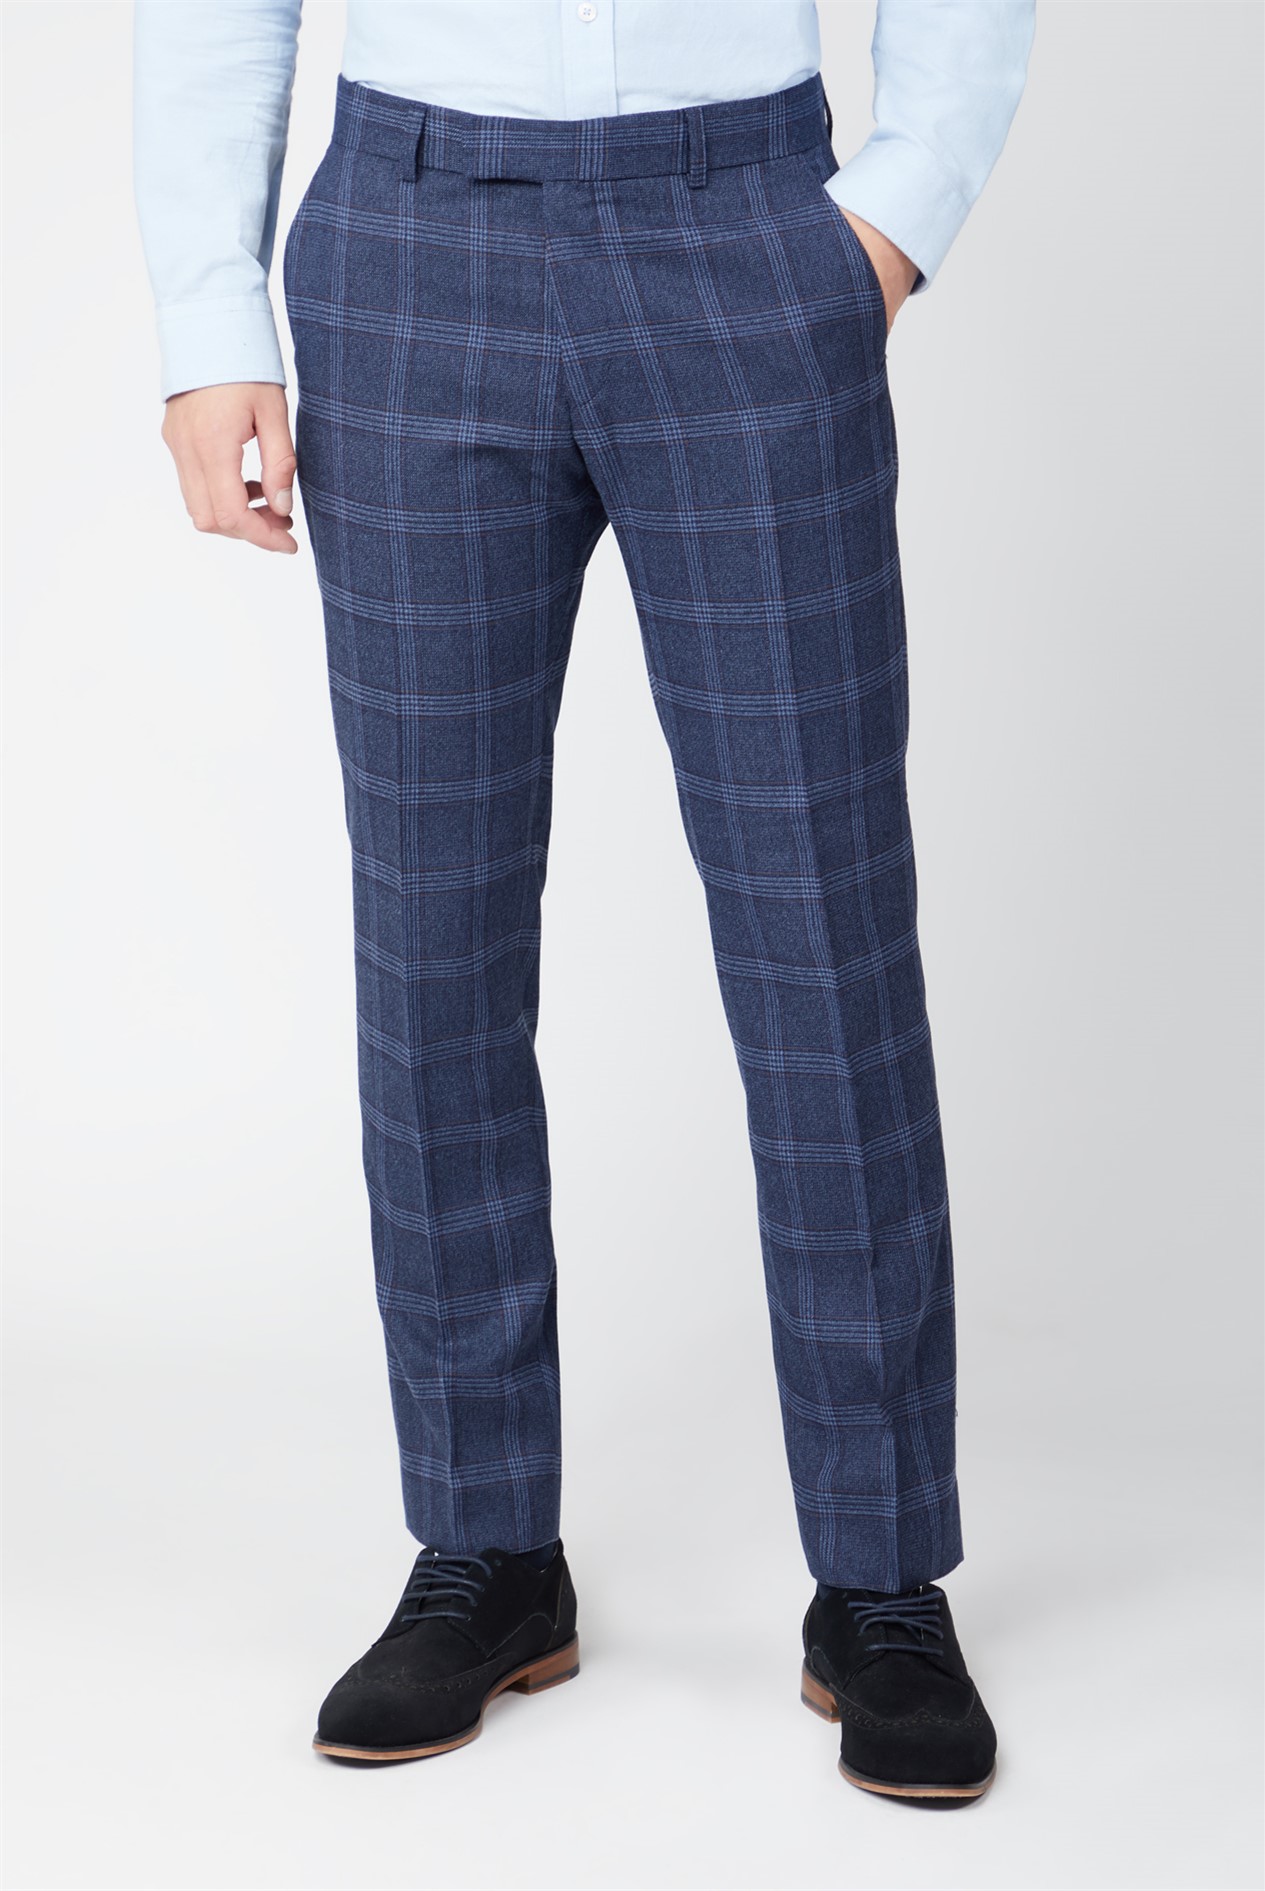 Antique Rogue Navy With Blue Over Check Suit